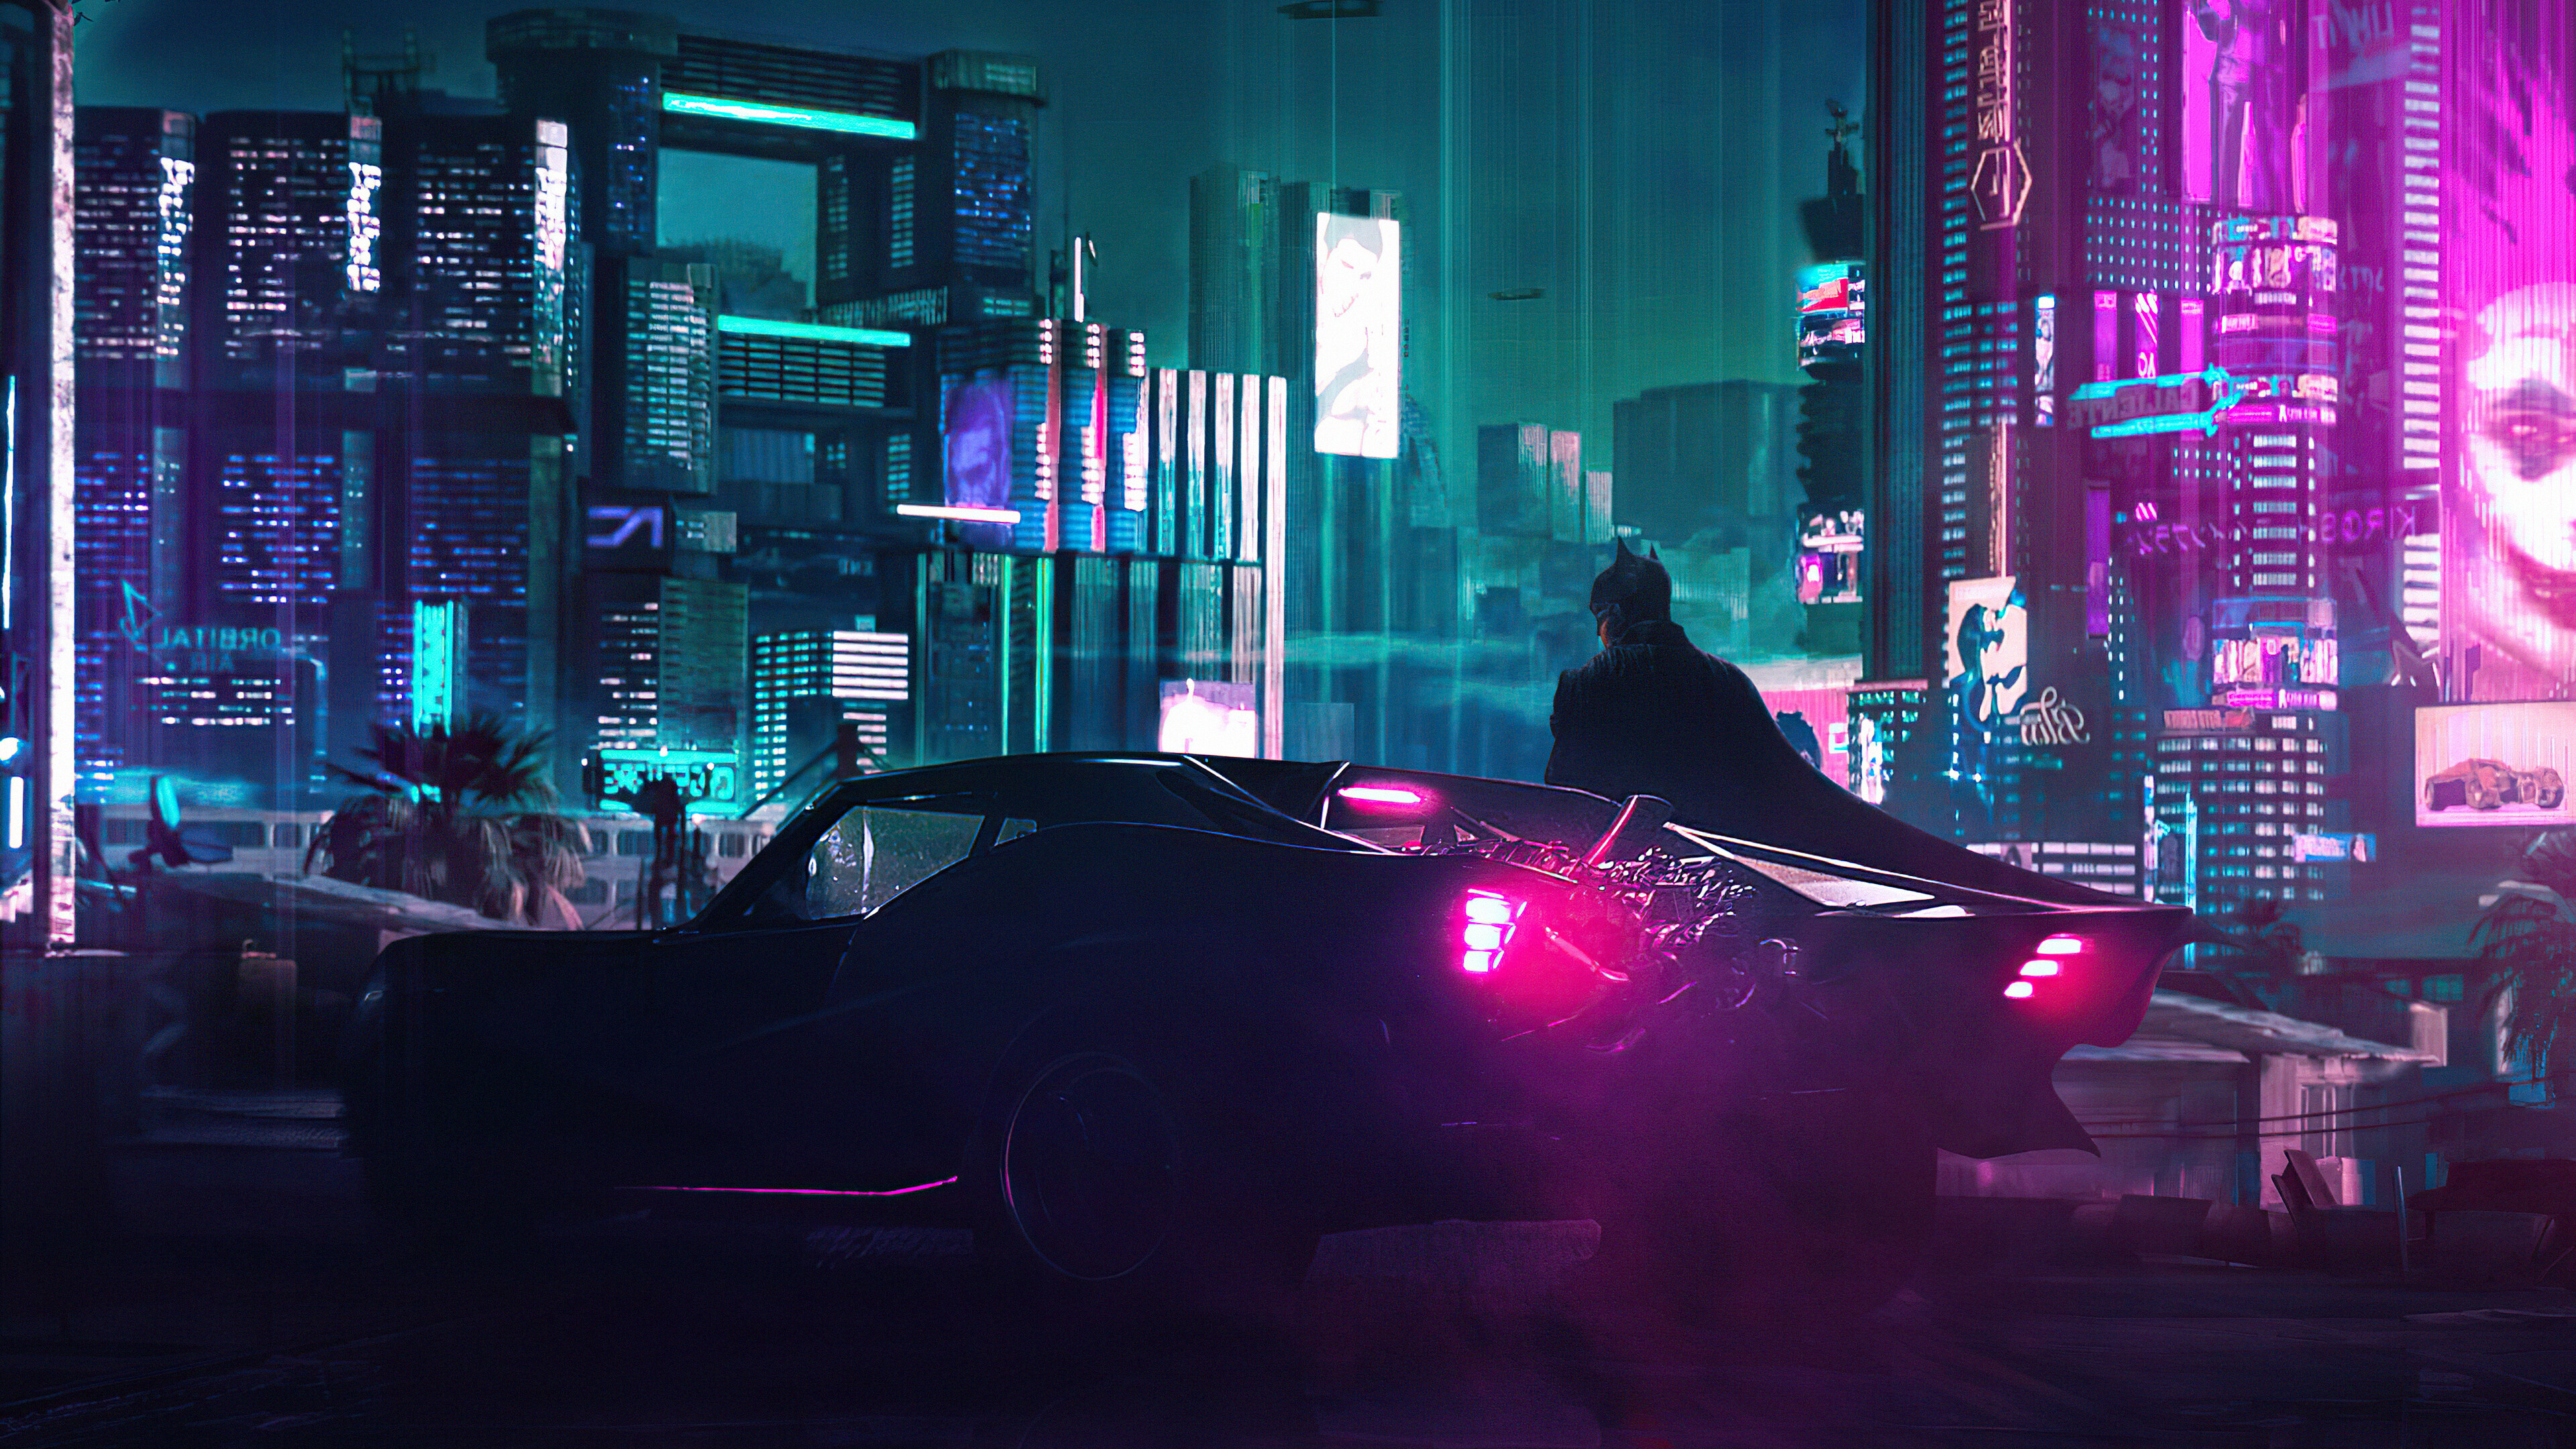 Cyberpunk 2077: Batman, Night City was designed with the help of urban planners, and its architecture drew on the style of Brutalism. 3840x2160 4K Wallpaper.